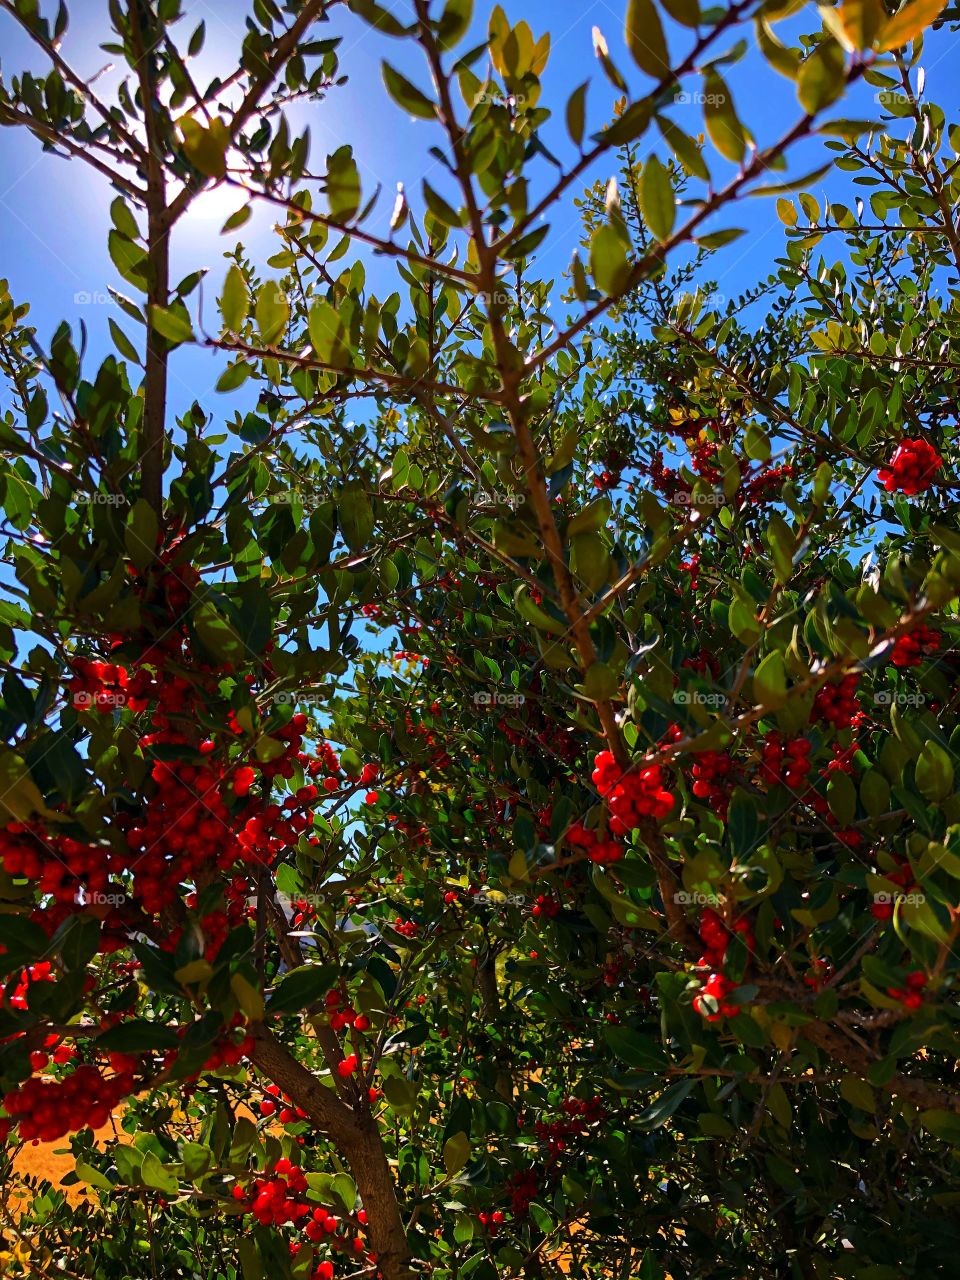 Pretty Red Berry Bushes. These are taller than my 5’4 height. 